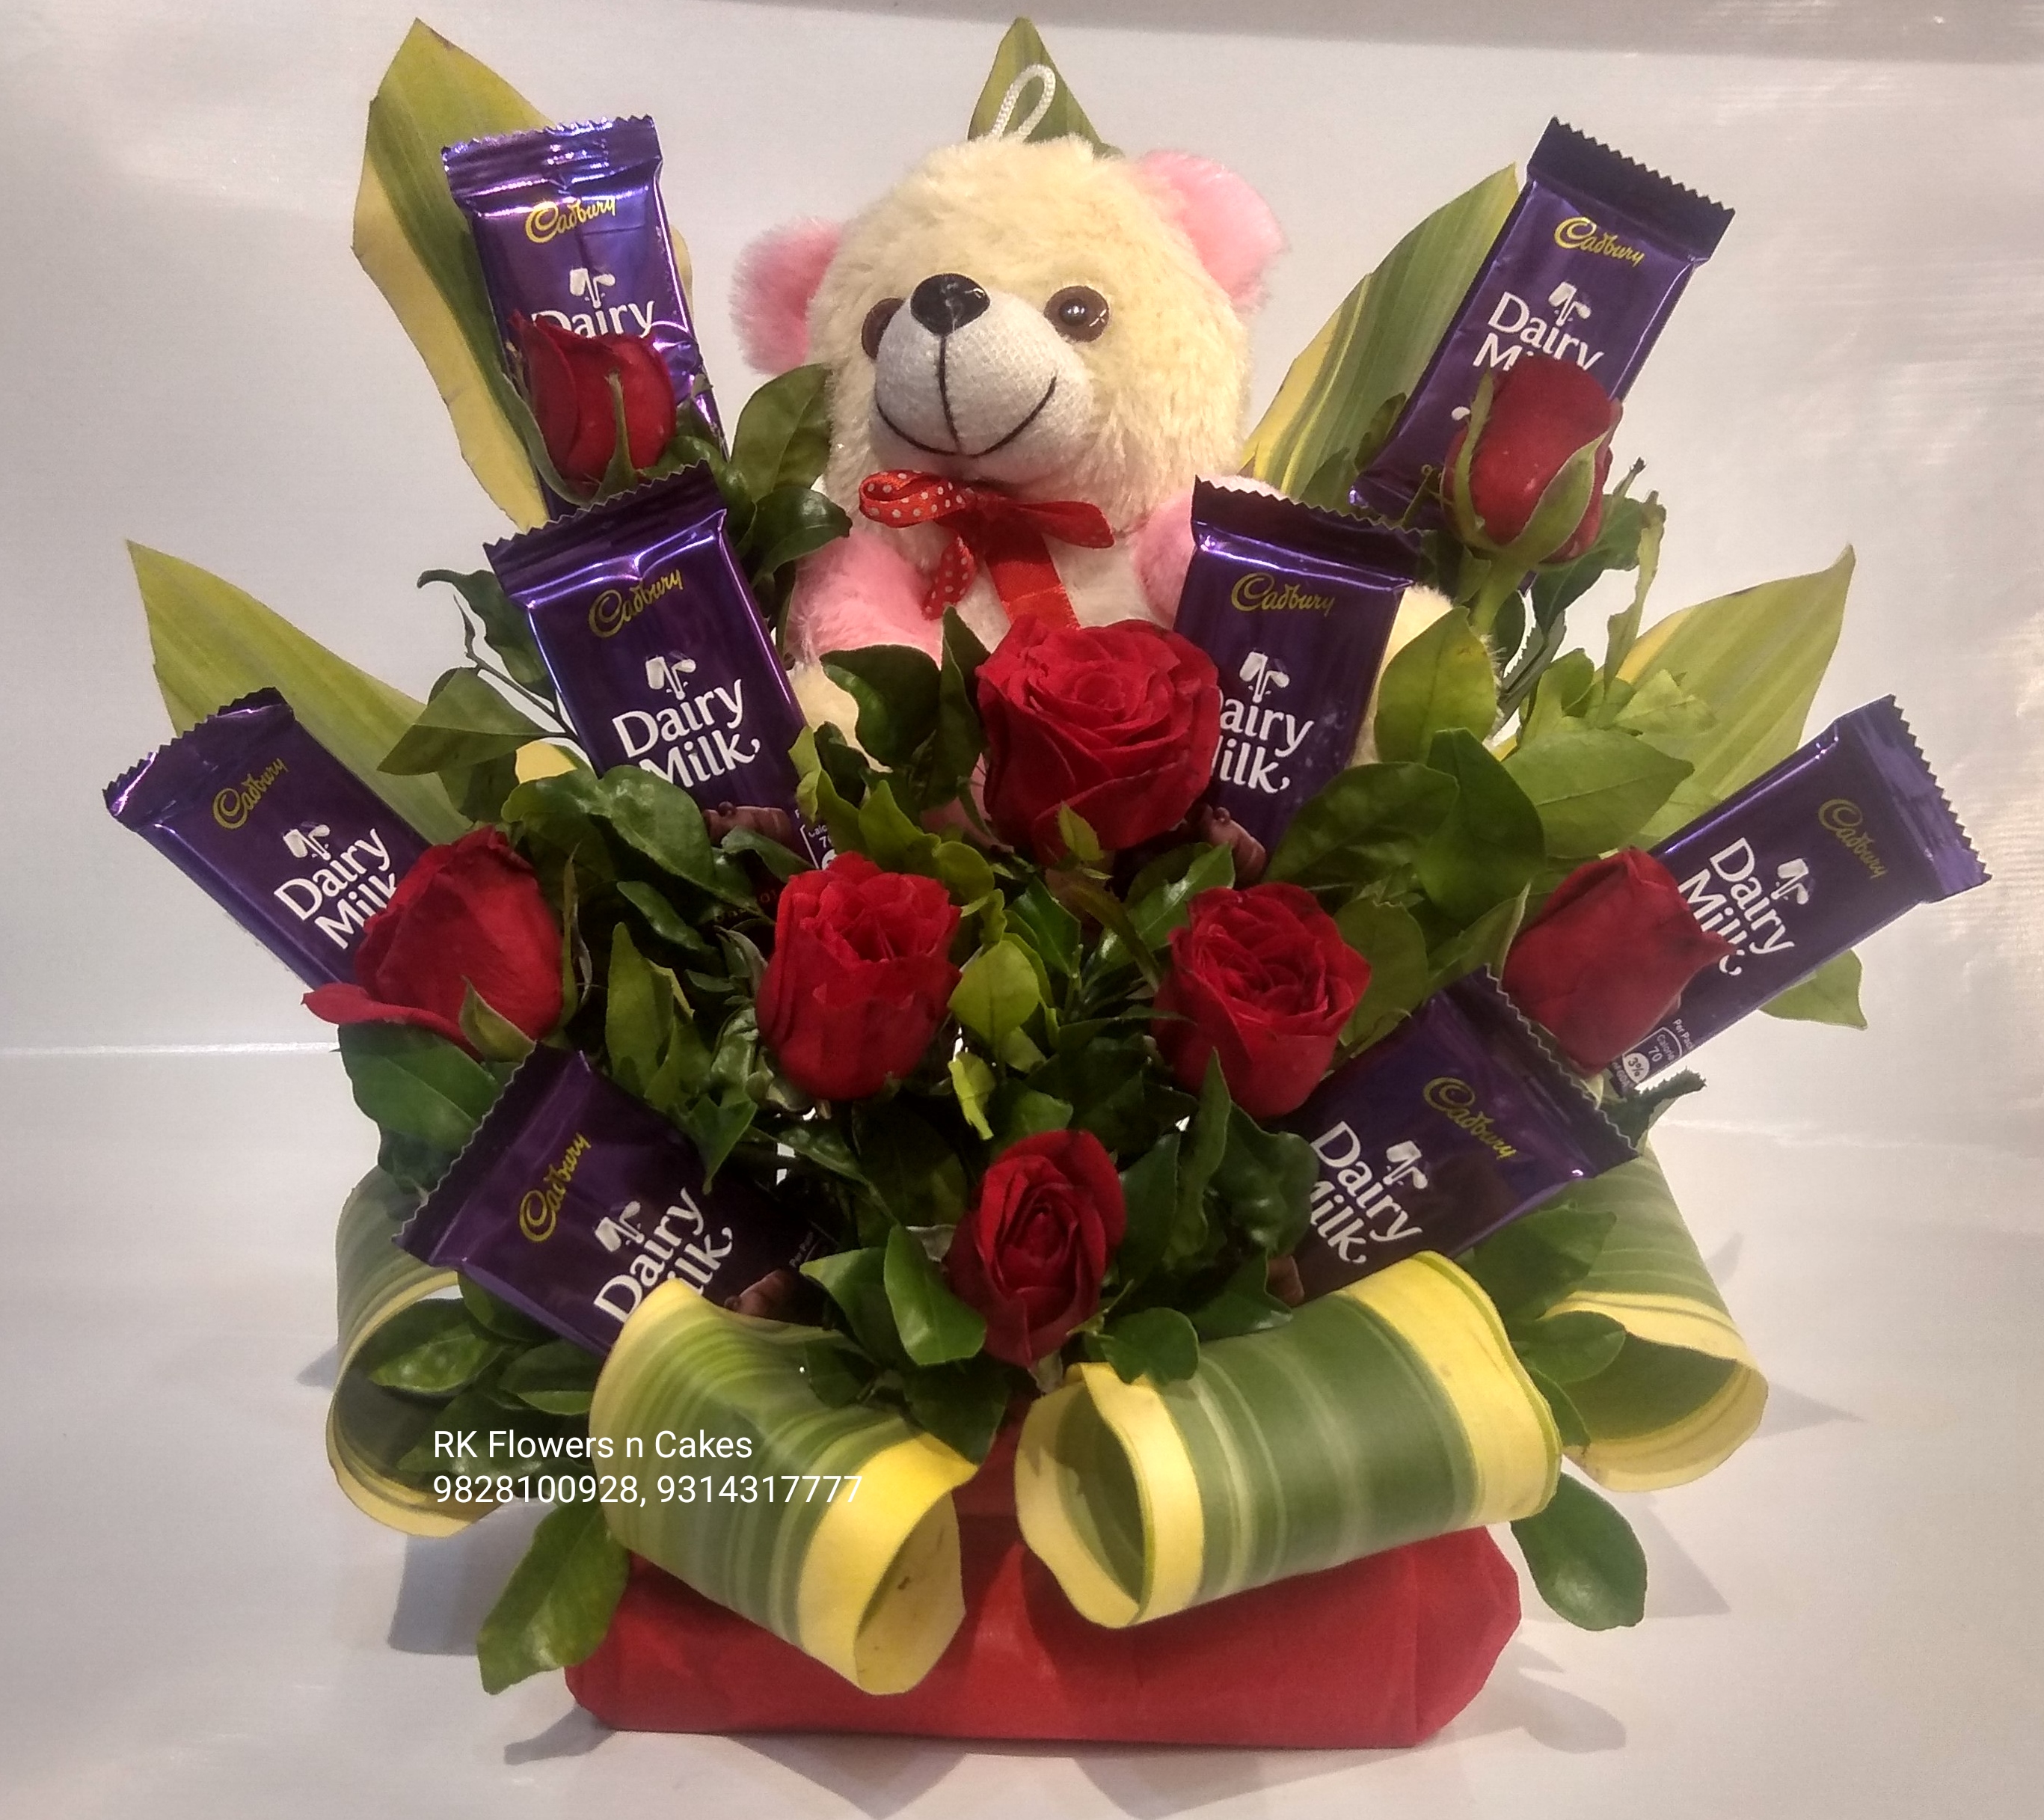 Roses & Chocolate With Teddy Arrangement 